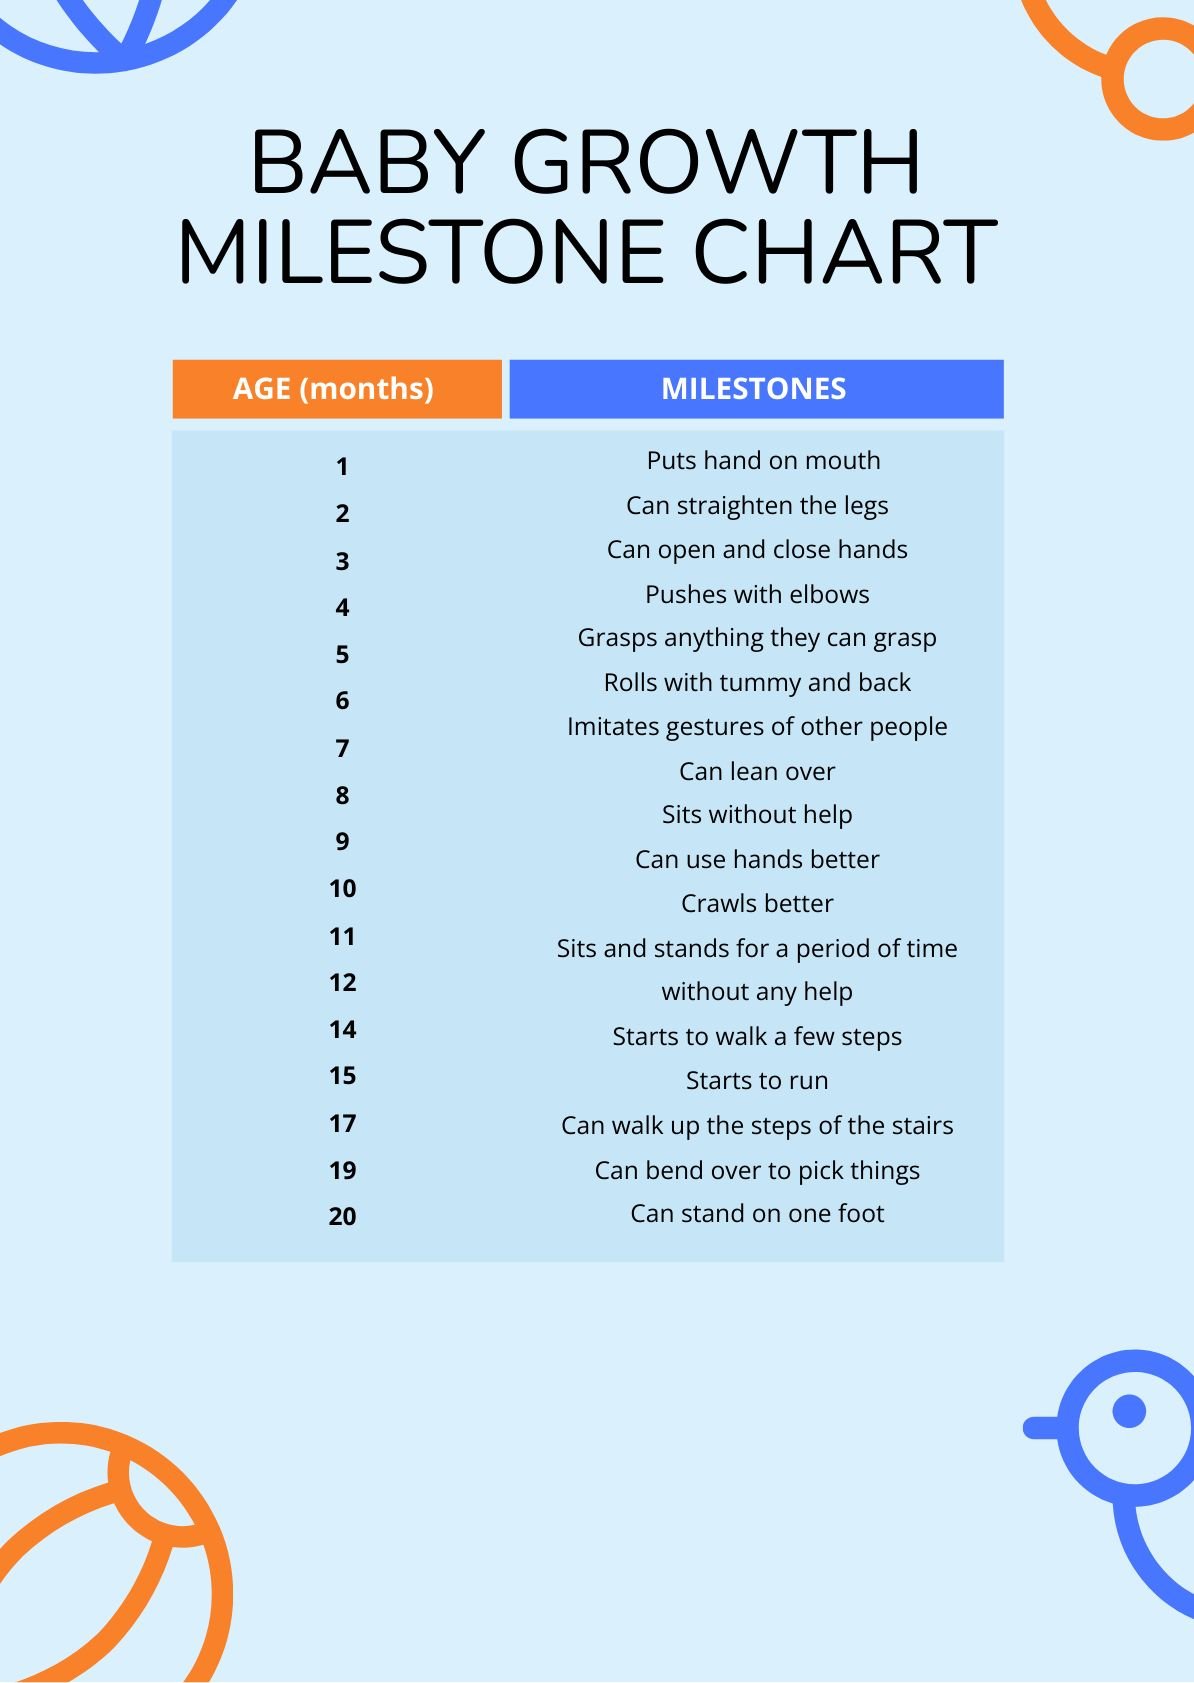 Free Premature Baby Growth Chart - Download in PDF | Template.net